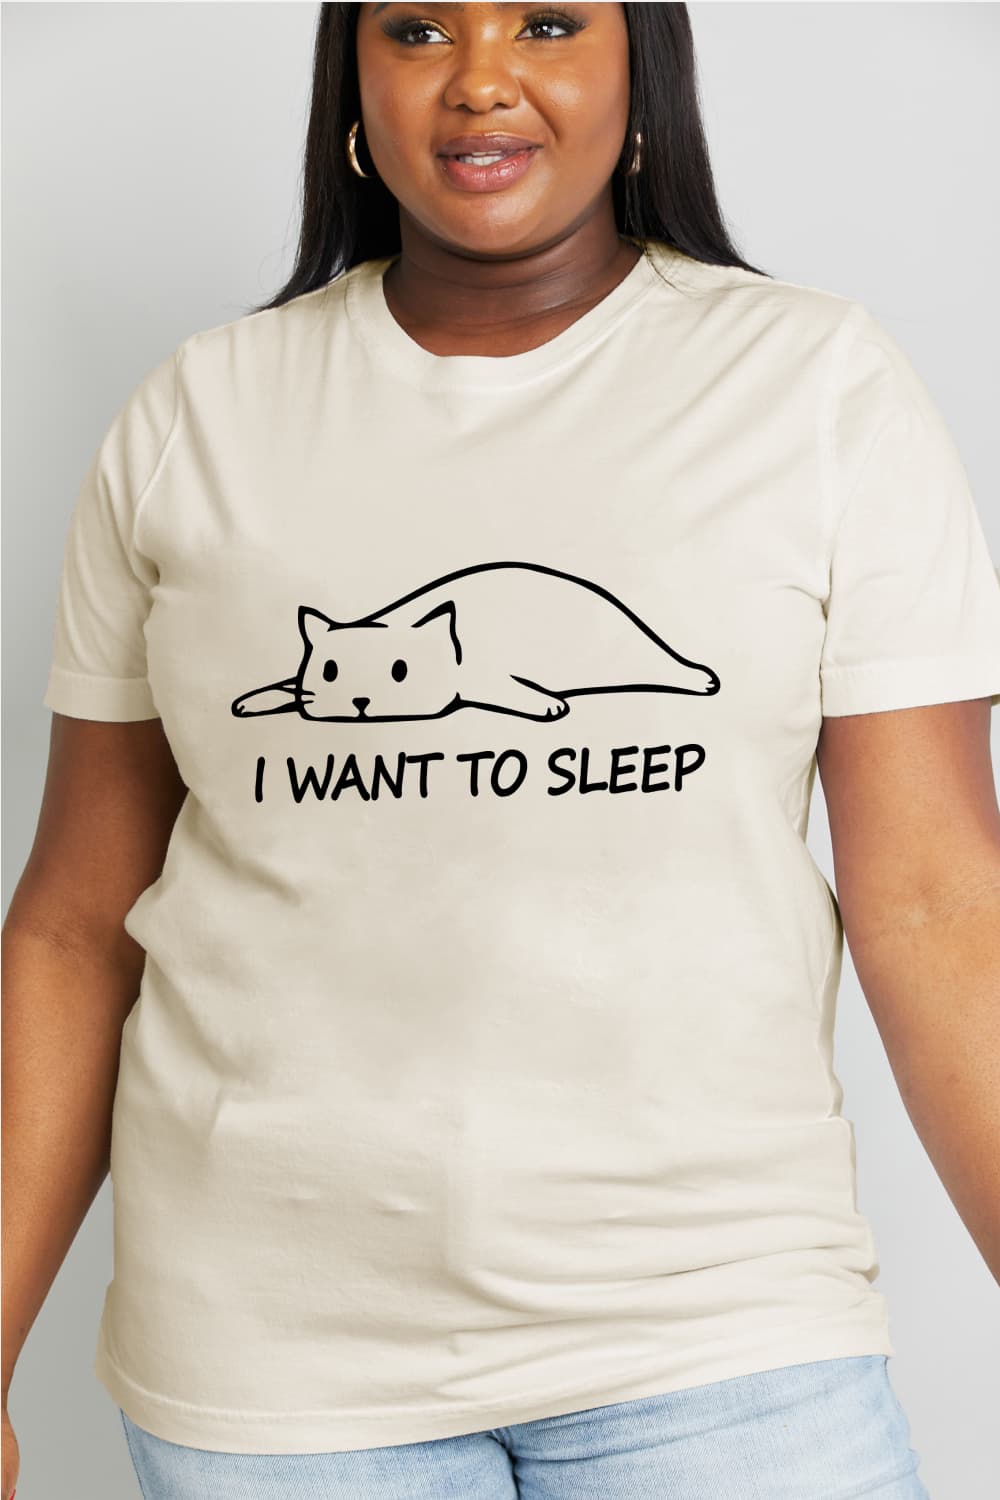 Simply Love Full Size I WANT TO SLEEP Graphic Cotton Tee